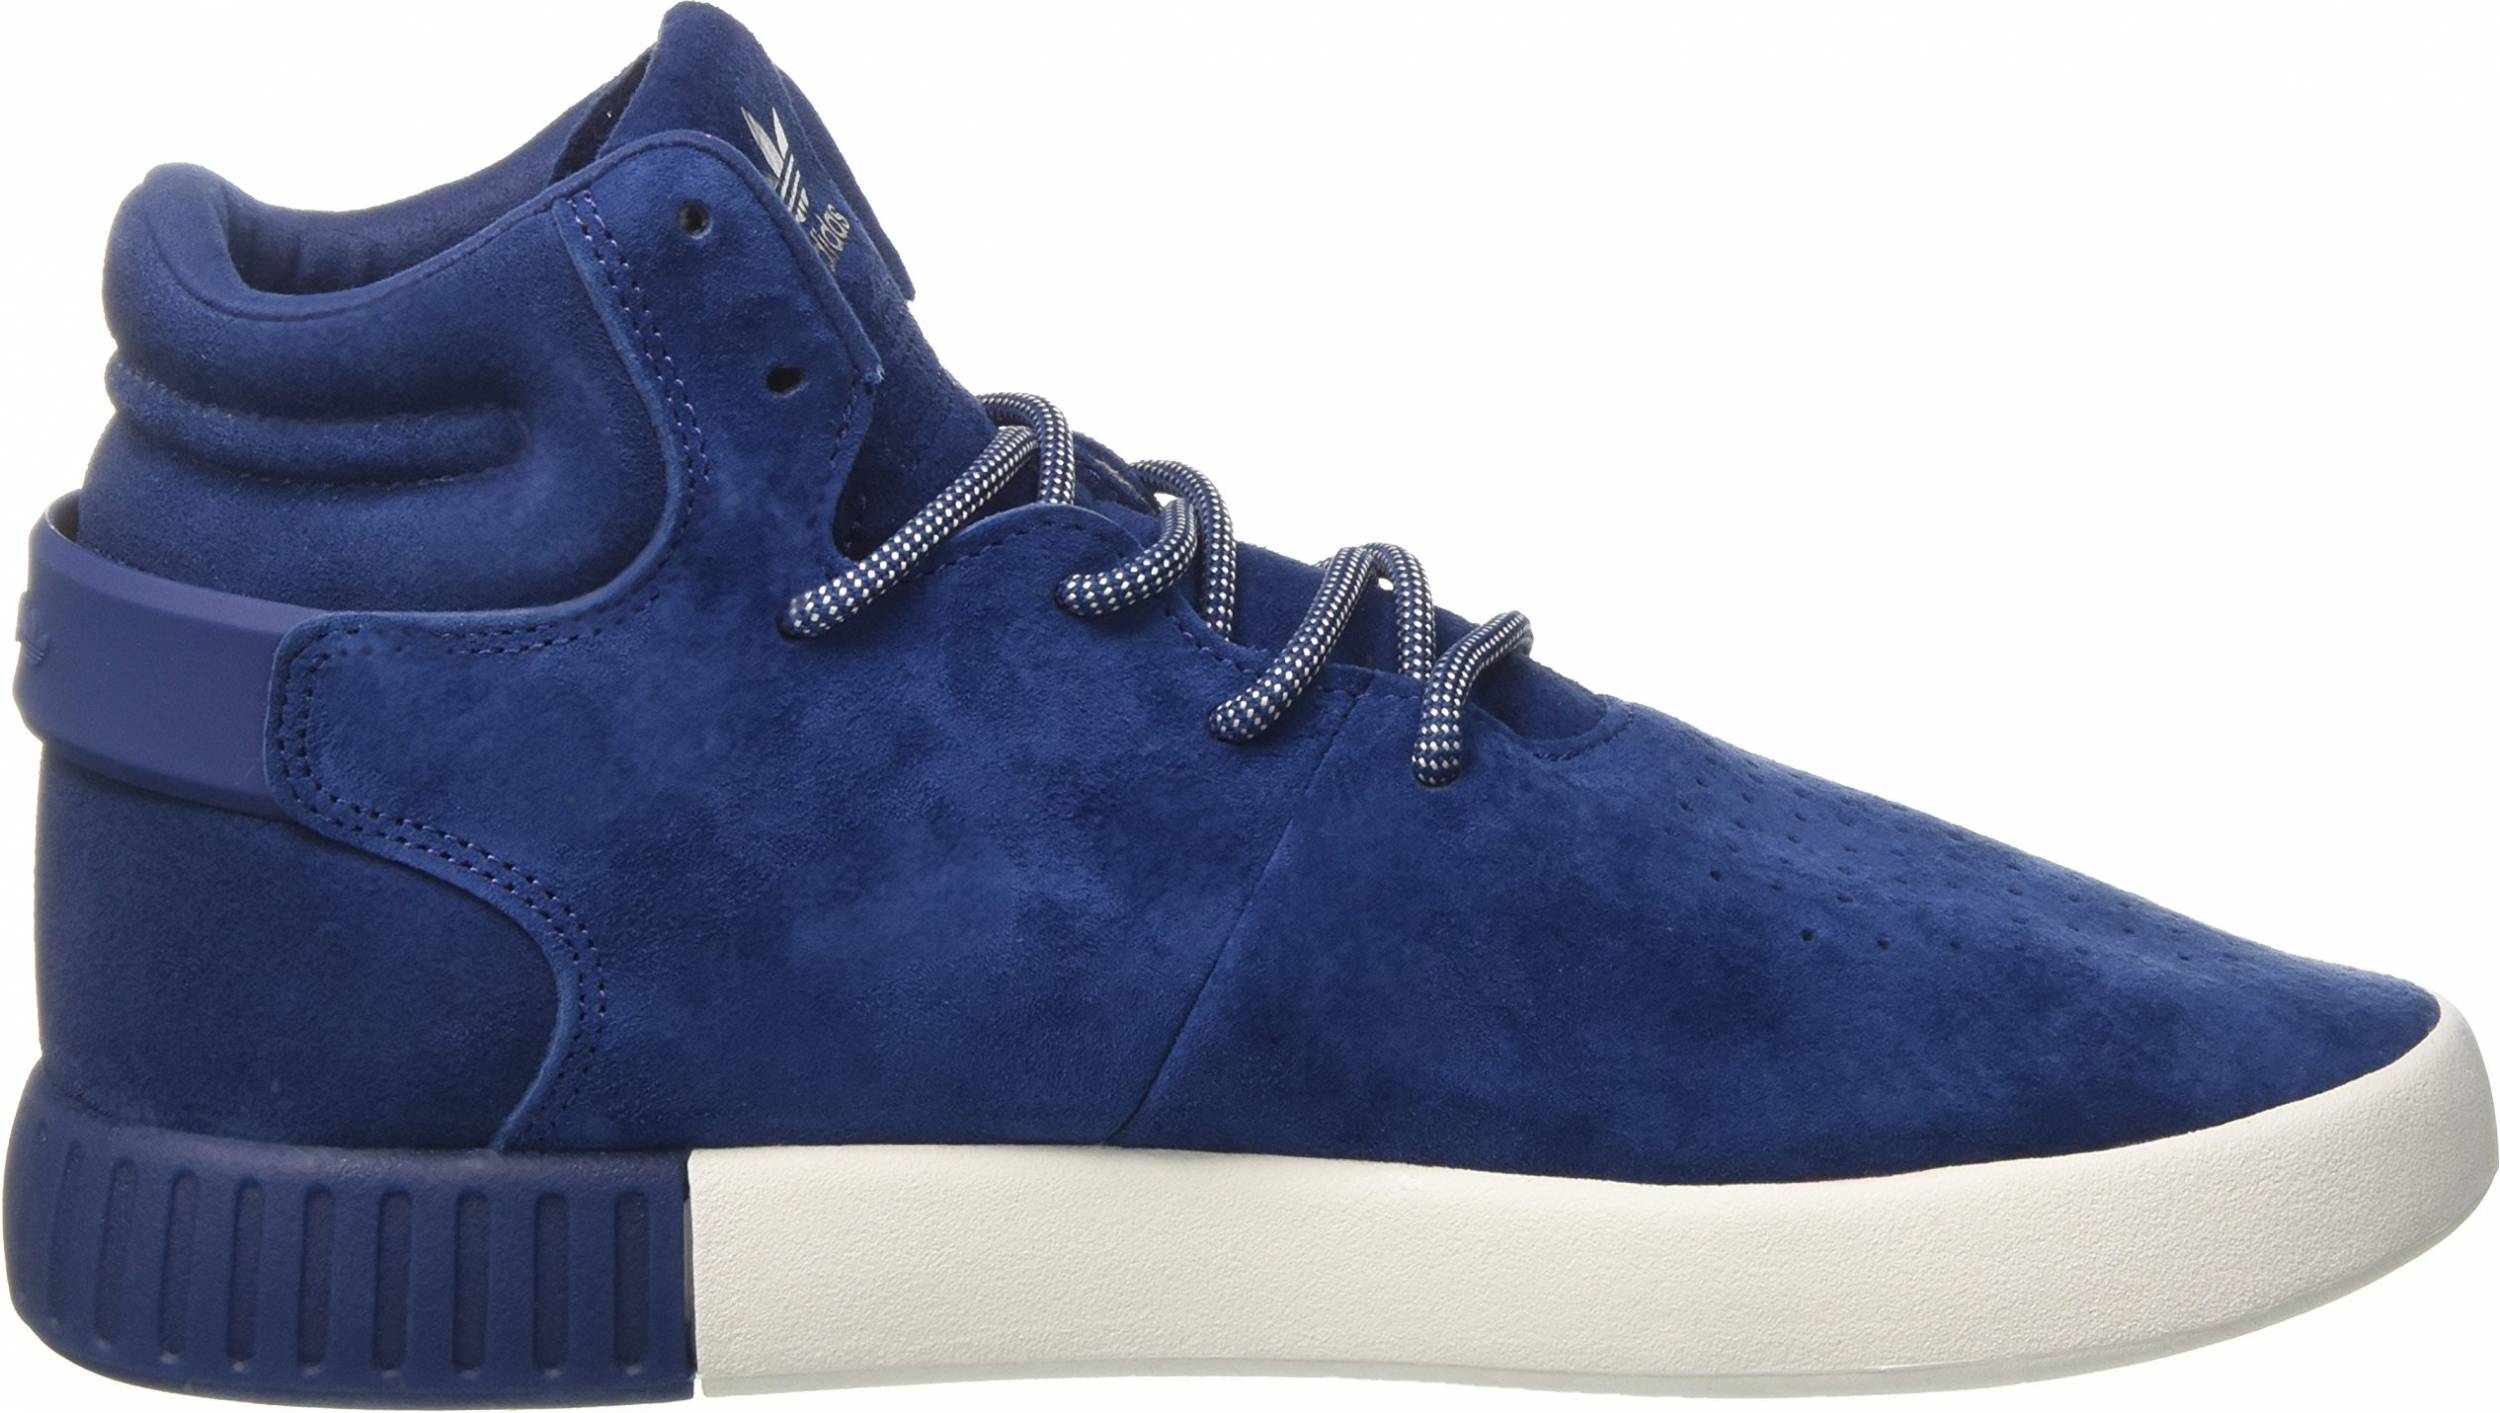 adidas tubular invader price in south africa